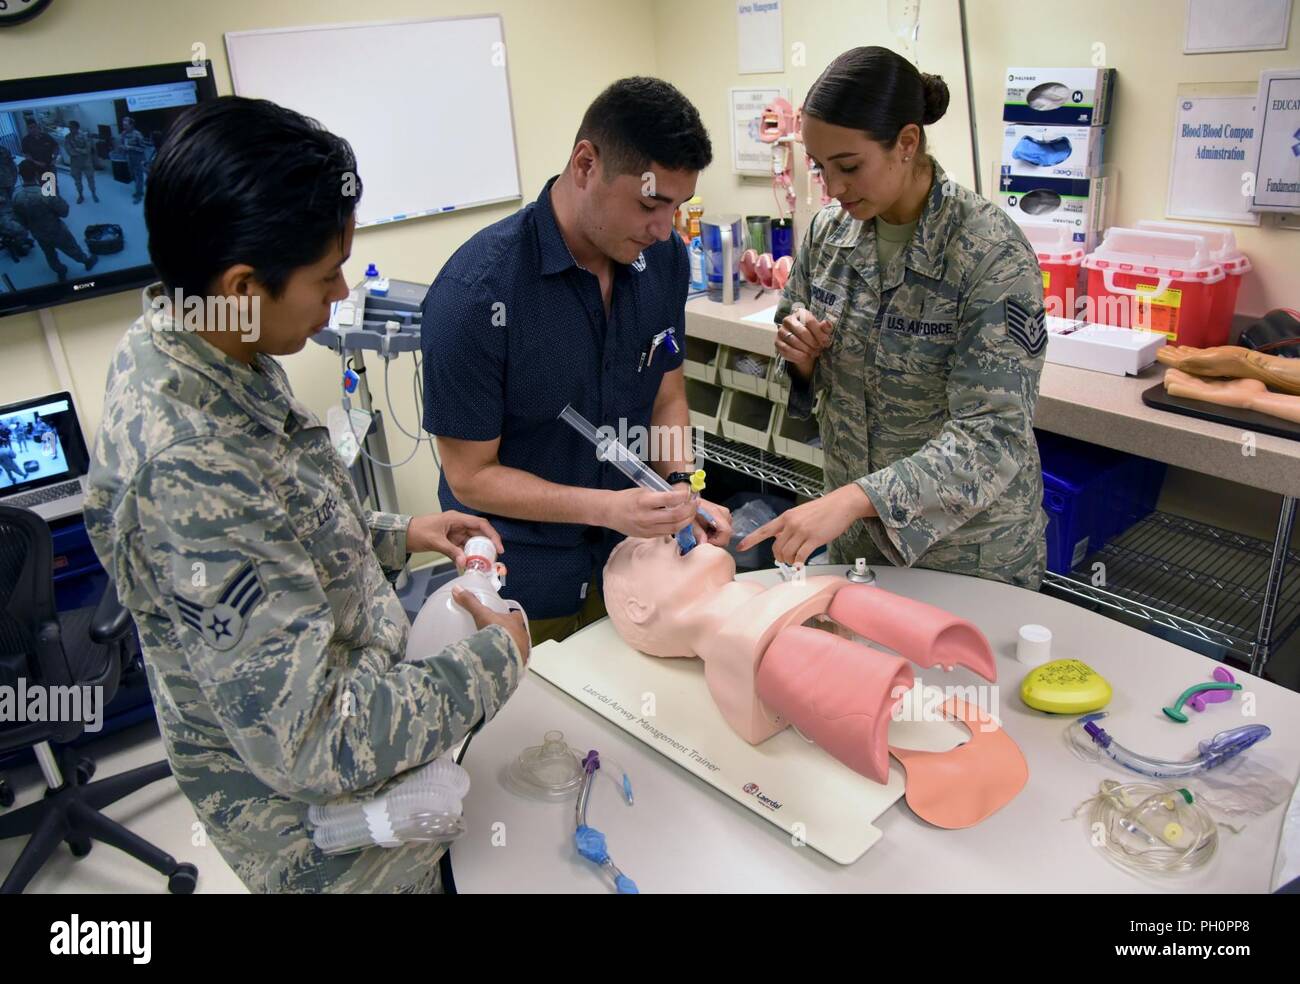 U.S. Air Force Tech. Sgt. Juliet Corcillo, 81st Medical Operations Squadron emergency room NCO in charge, conducts a respiratory training session with Senior Airman Lupita Lopez, 81st Aerospace Medicine Squadron medical technician, left, and Airman 1st Class Enrique Padron, 81st MDOS medical technician, in the Keesler Medical Center at Keesler Air Force Base, Mississippi, June 14, 2018. Corcillo was awarded a full ride scholarship to medical school and will begin her first day July 6 with a four-year scholarship from the Air Force’s Health Professions Scholarship Program. Stock Photo